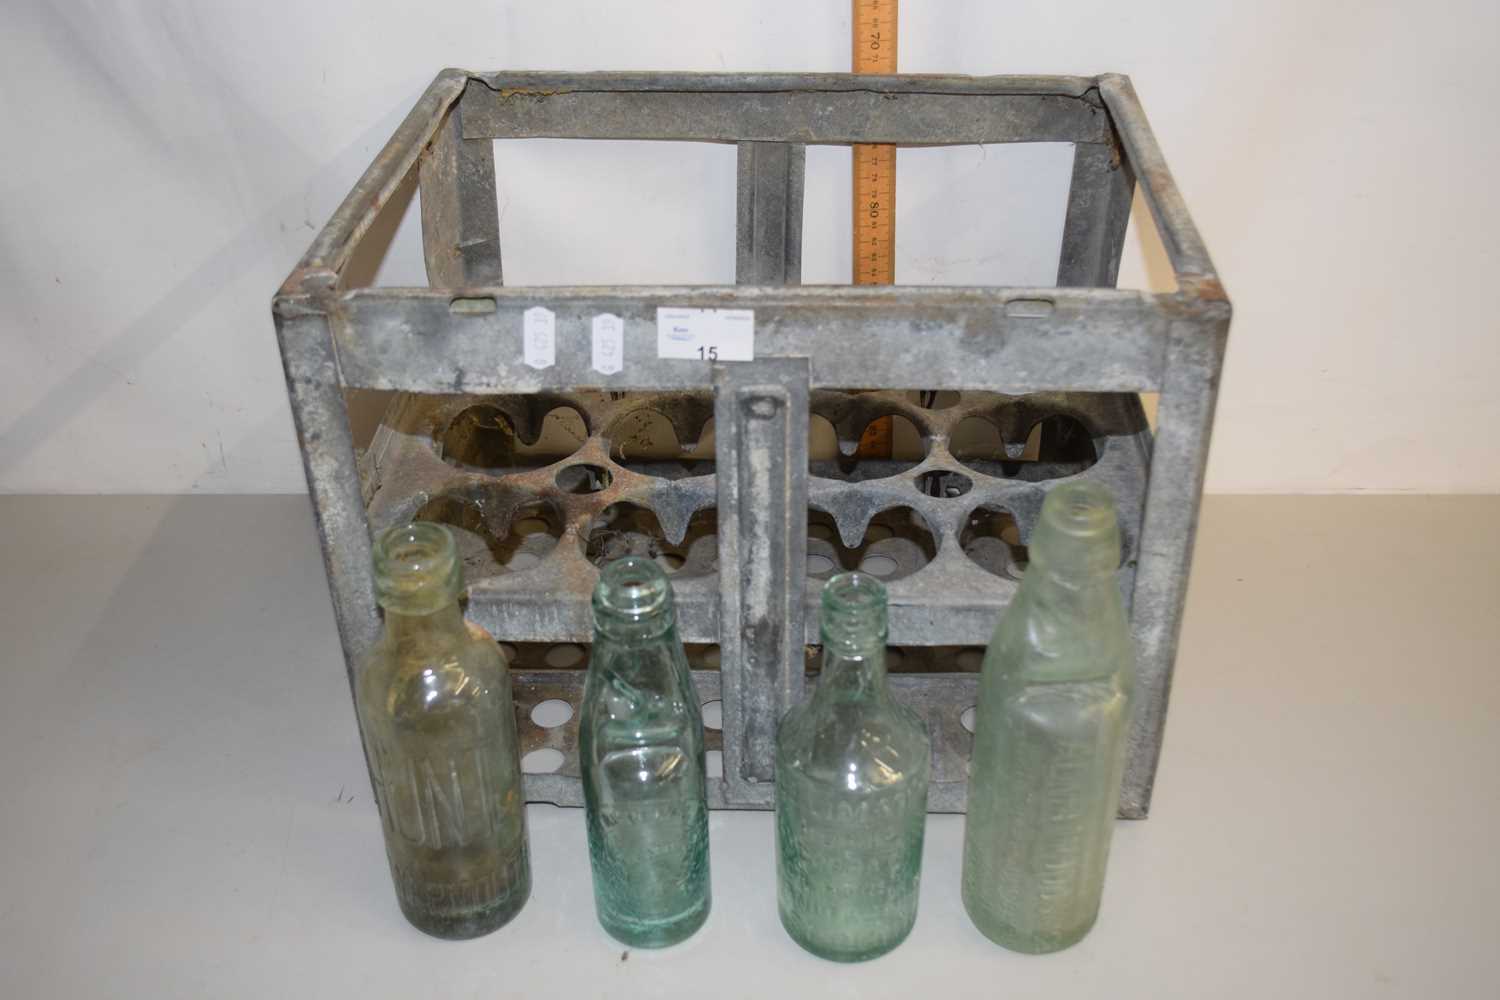 Lot 15 - Vintage metal bottle crate and contents